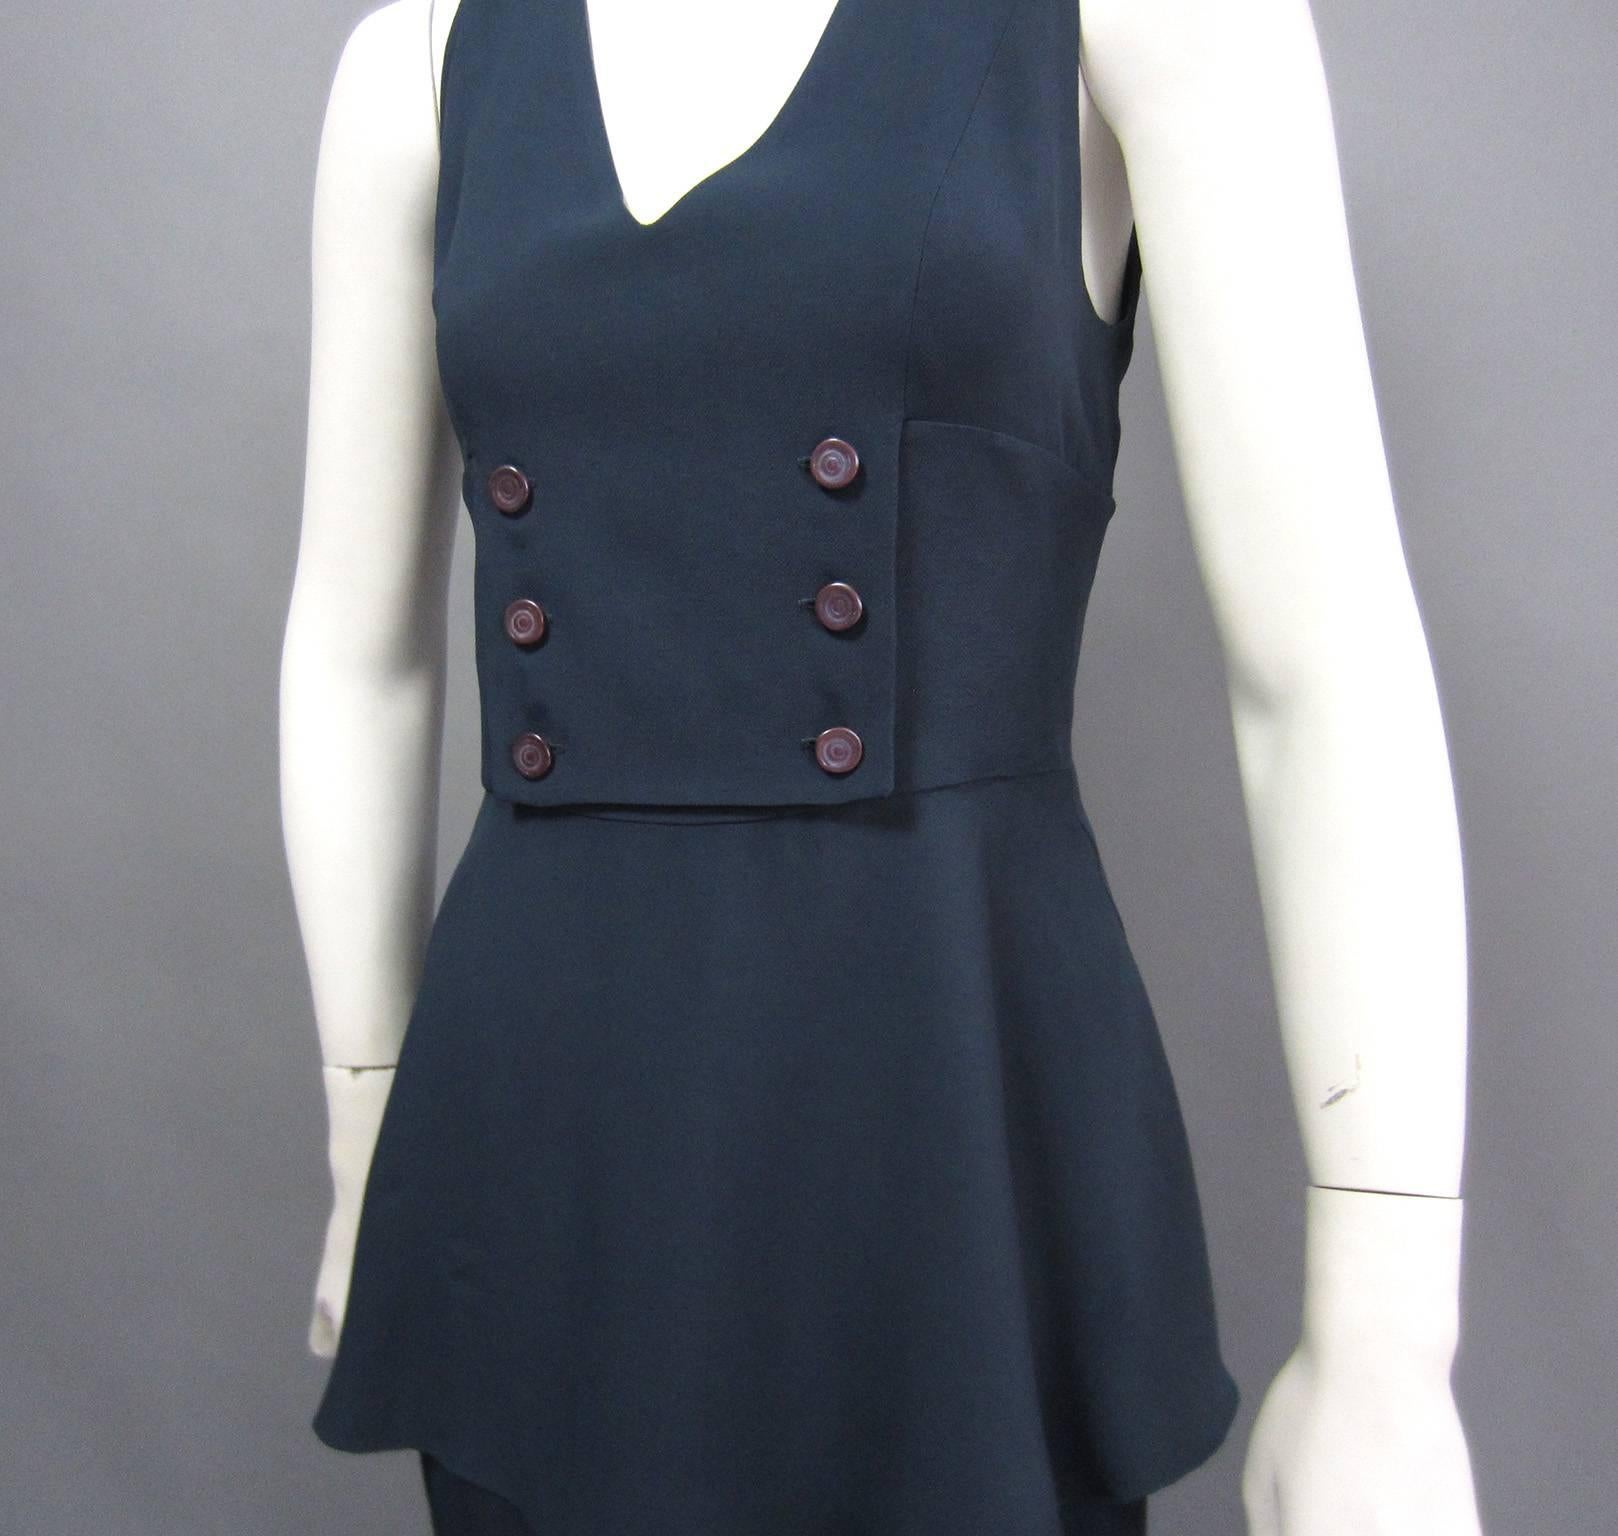 CHLOE 3 piece Ensemble with Jacket, Top & Skirt with Button Detail For Sale 1